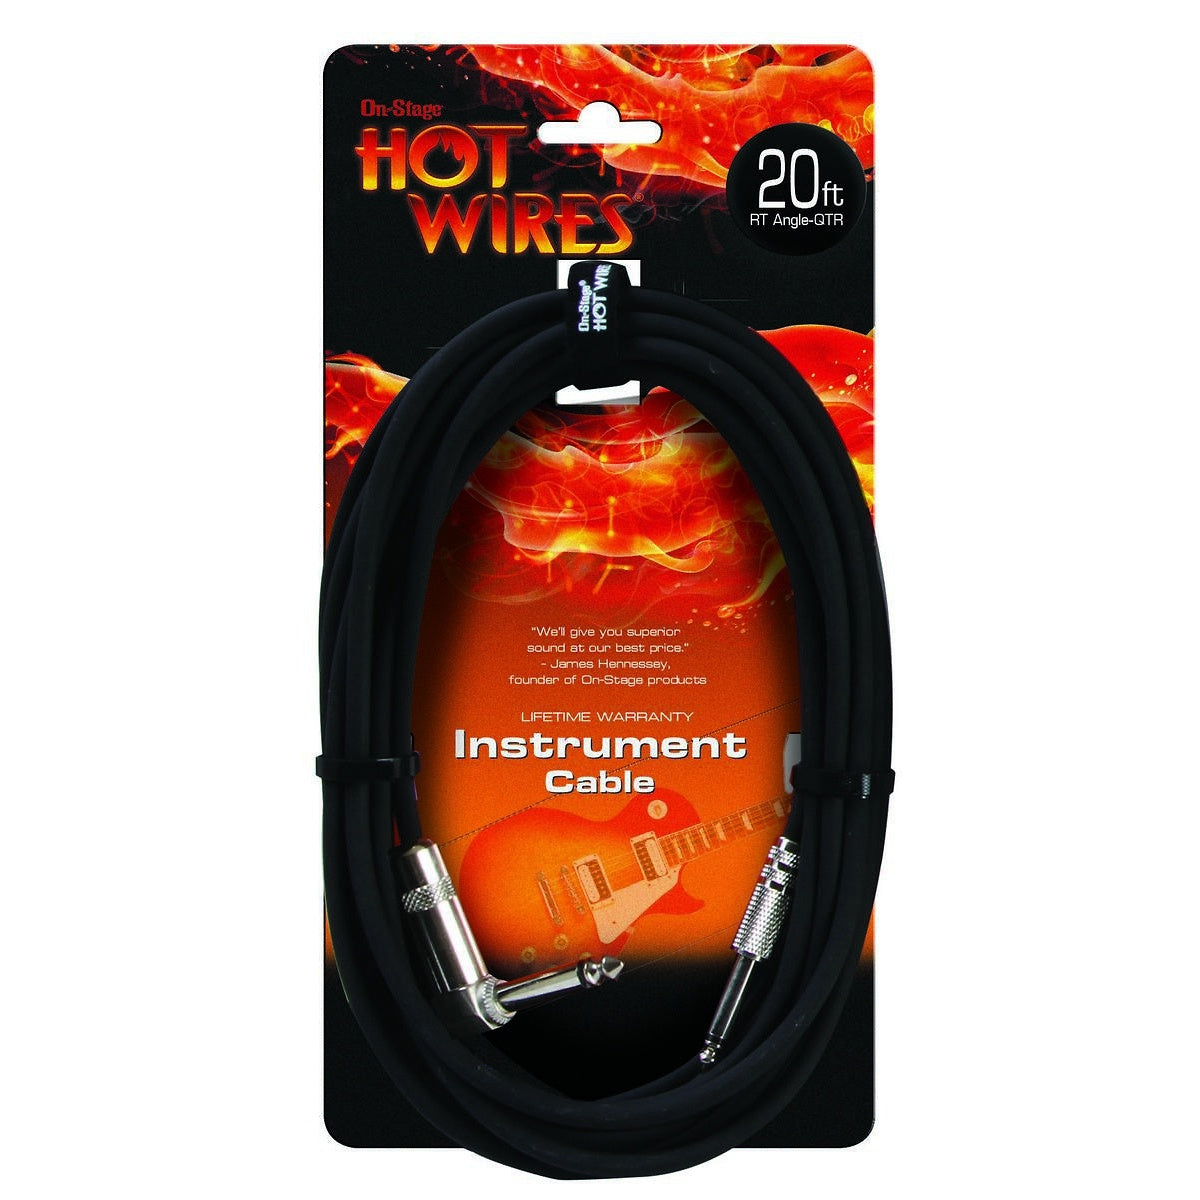 Hot Wires Guitar Instrument Cable, with Right Angle End, 20 Foot